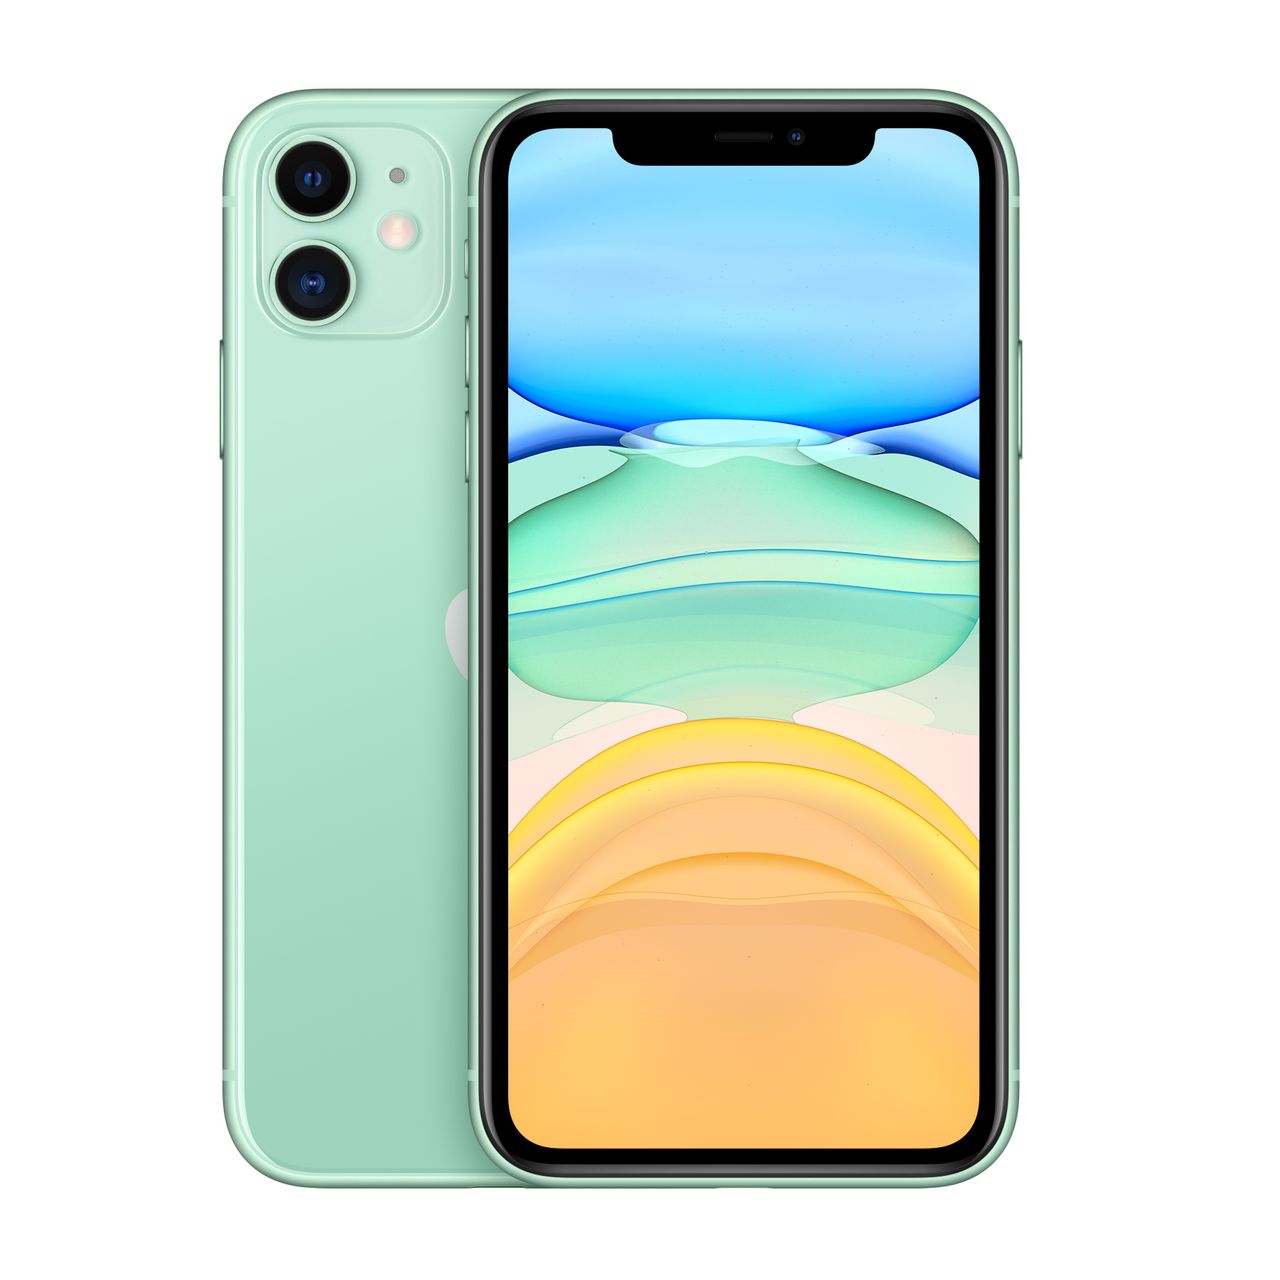 Apple iPhone 11 256GB in Green Review